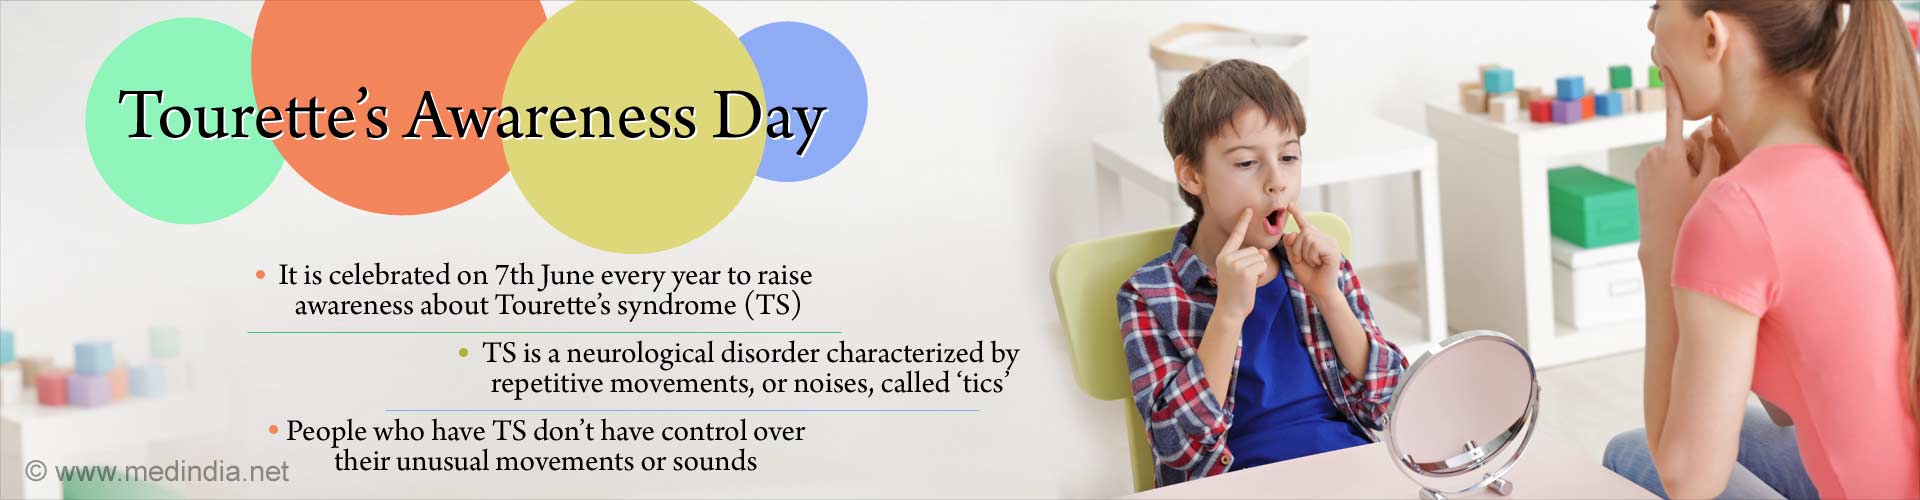 Tourette's Awareness Day. It is celebrated on 7th June every year to raise awareness about Tourette's syndrome (TS). TS is a neurological disorder characterized by repetitive movements, or noises, called ‘tics.' People who have TS don't have control over their unusual movements or sounds.
